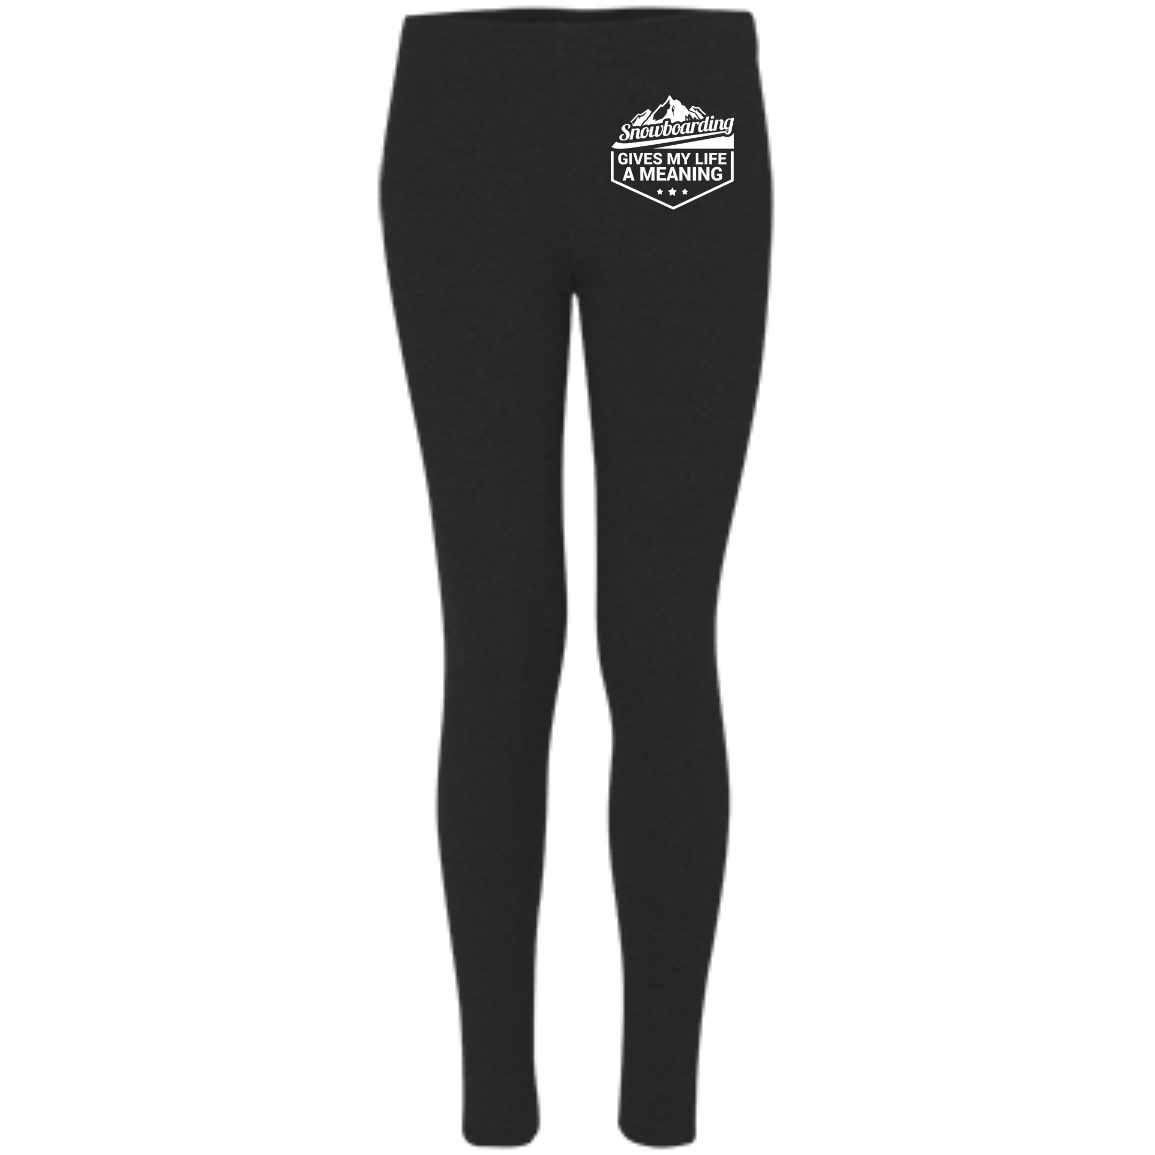 Snowboarding Gives My Life a Meaning Women's Embroidered Leggings - Powderaddicts